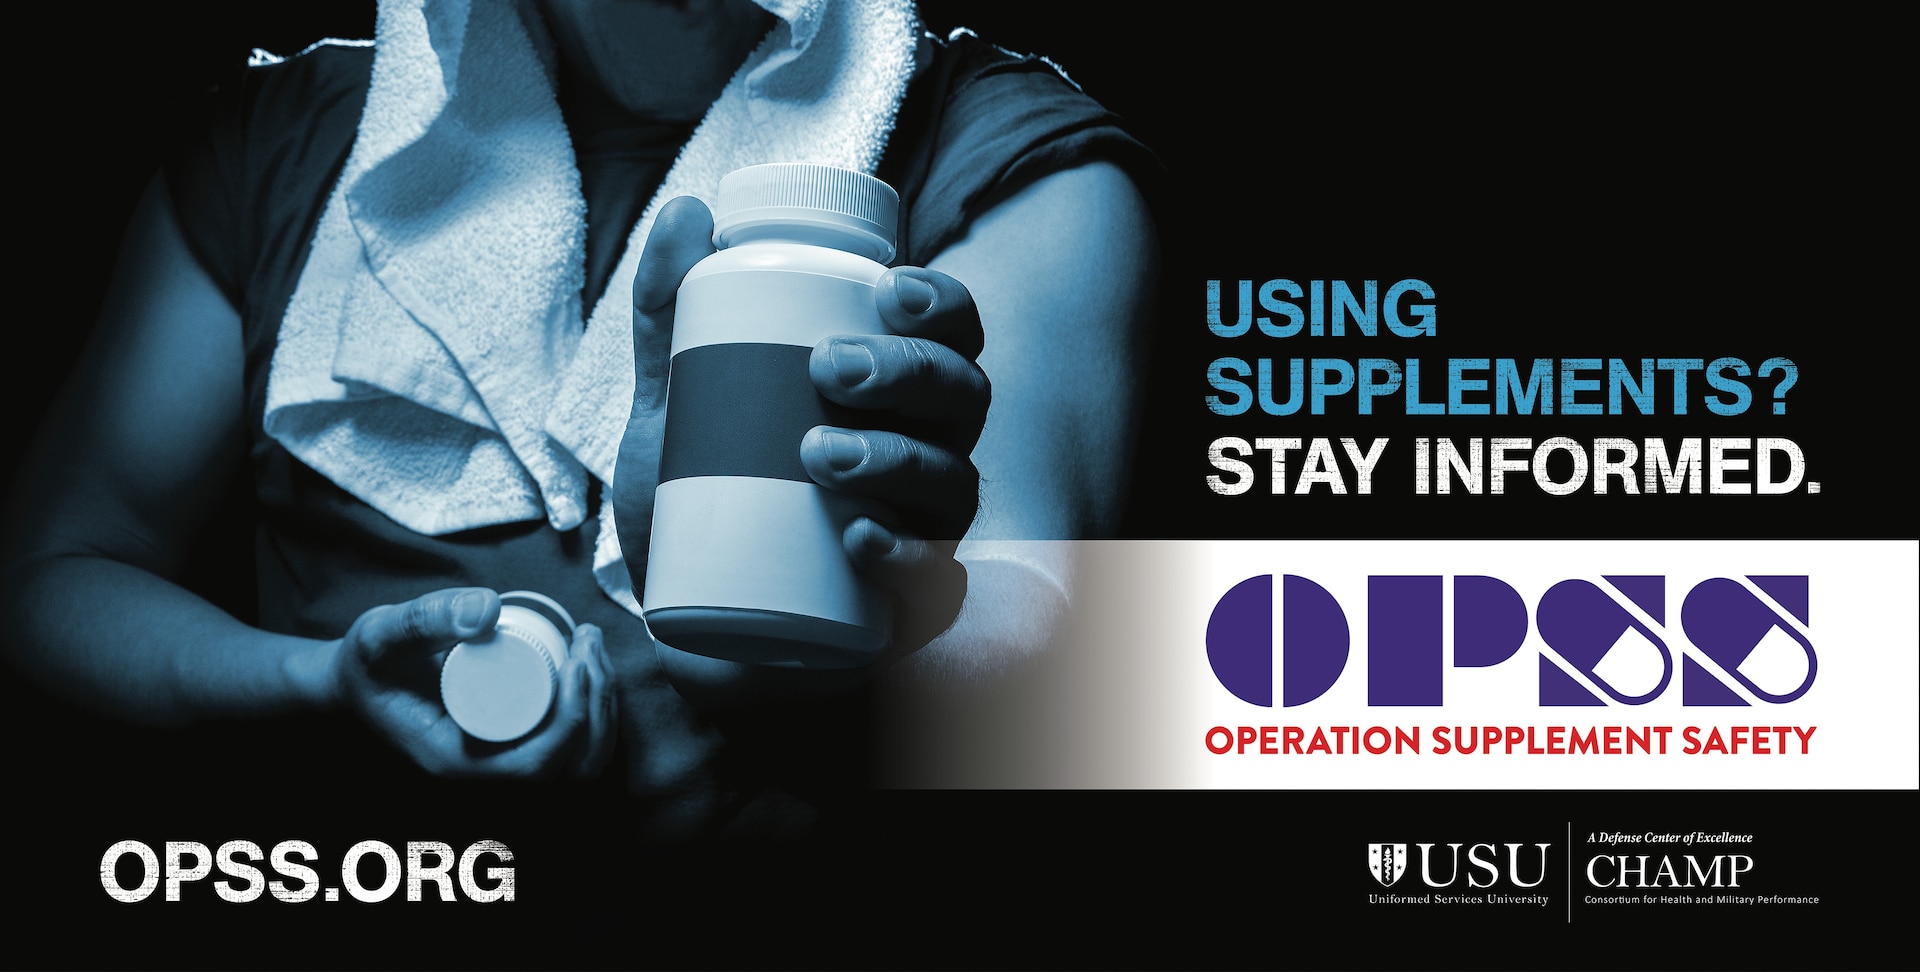 Operation Supplement Safety, an ongoing program under the Consortium for Health and Military Performance at the Uniformed Services University of the Health Sciences, provides military service members and their families, healthcare providers, and leaders, up-to-date information about dietary supplements. Dietary supplements refer to any vitamin, mineral, botanical, amino acid, or substance taken by mouth and labeled on the front of the product stating it’s a dietary supplement.